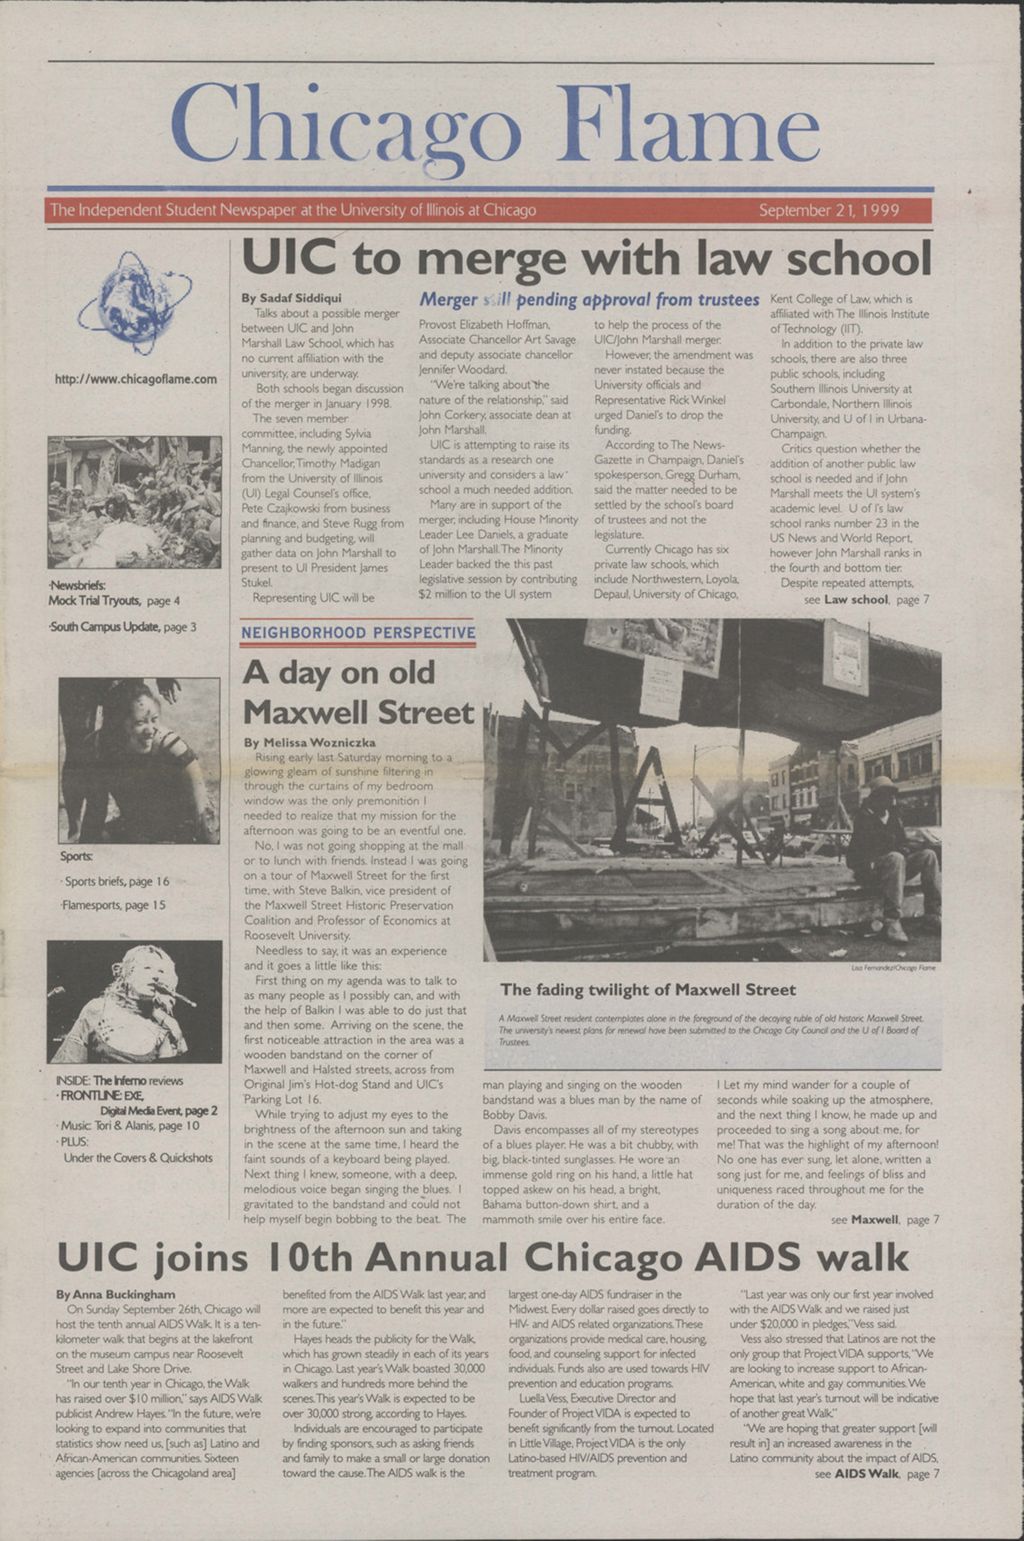 Miniature of Chicago Flame (September 21, 1999)